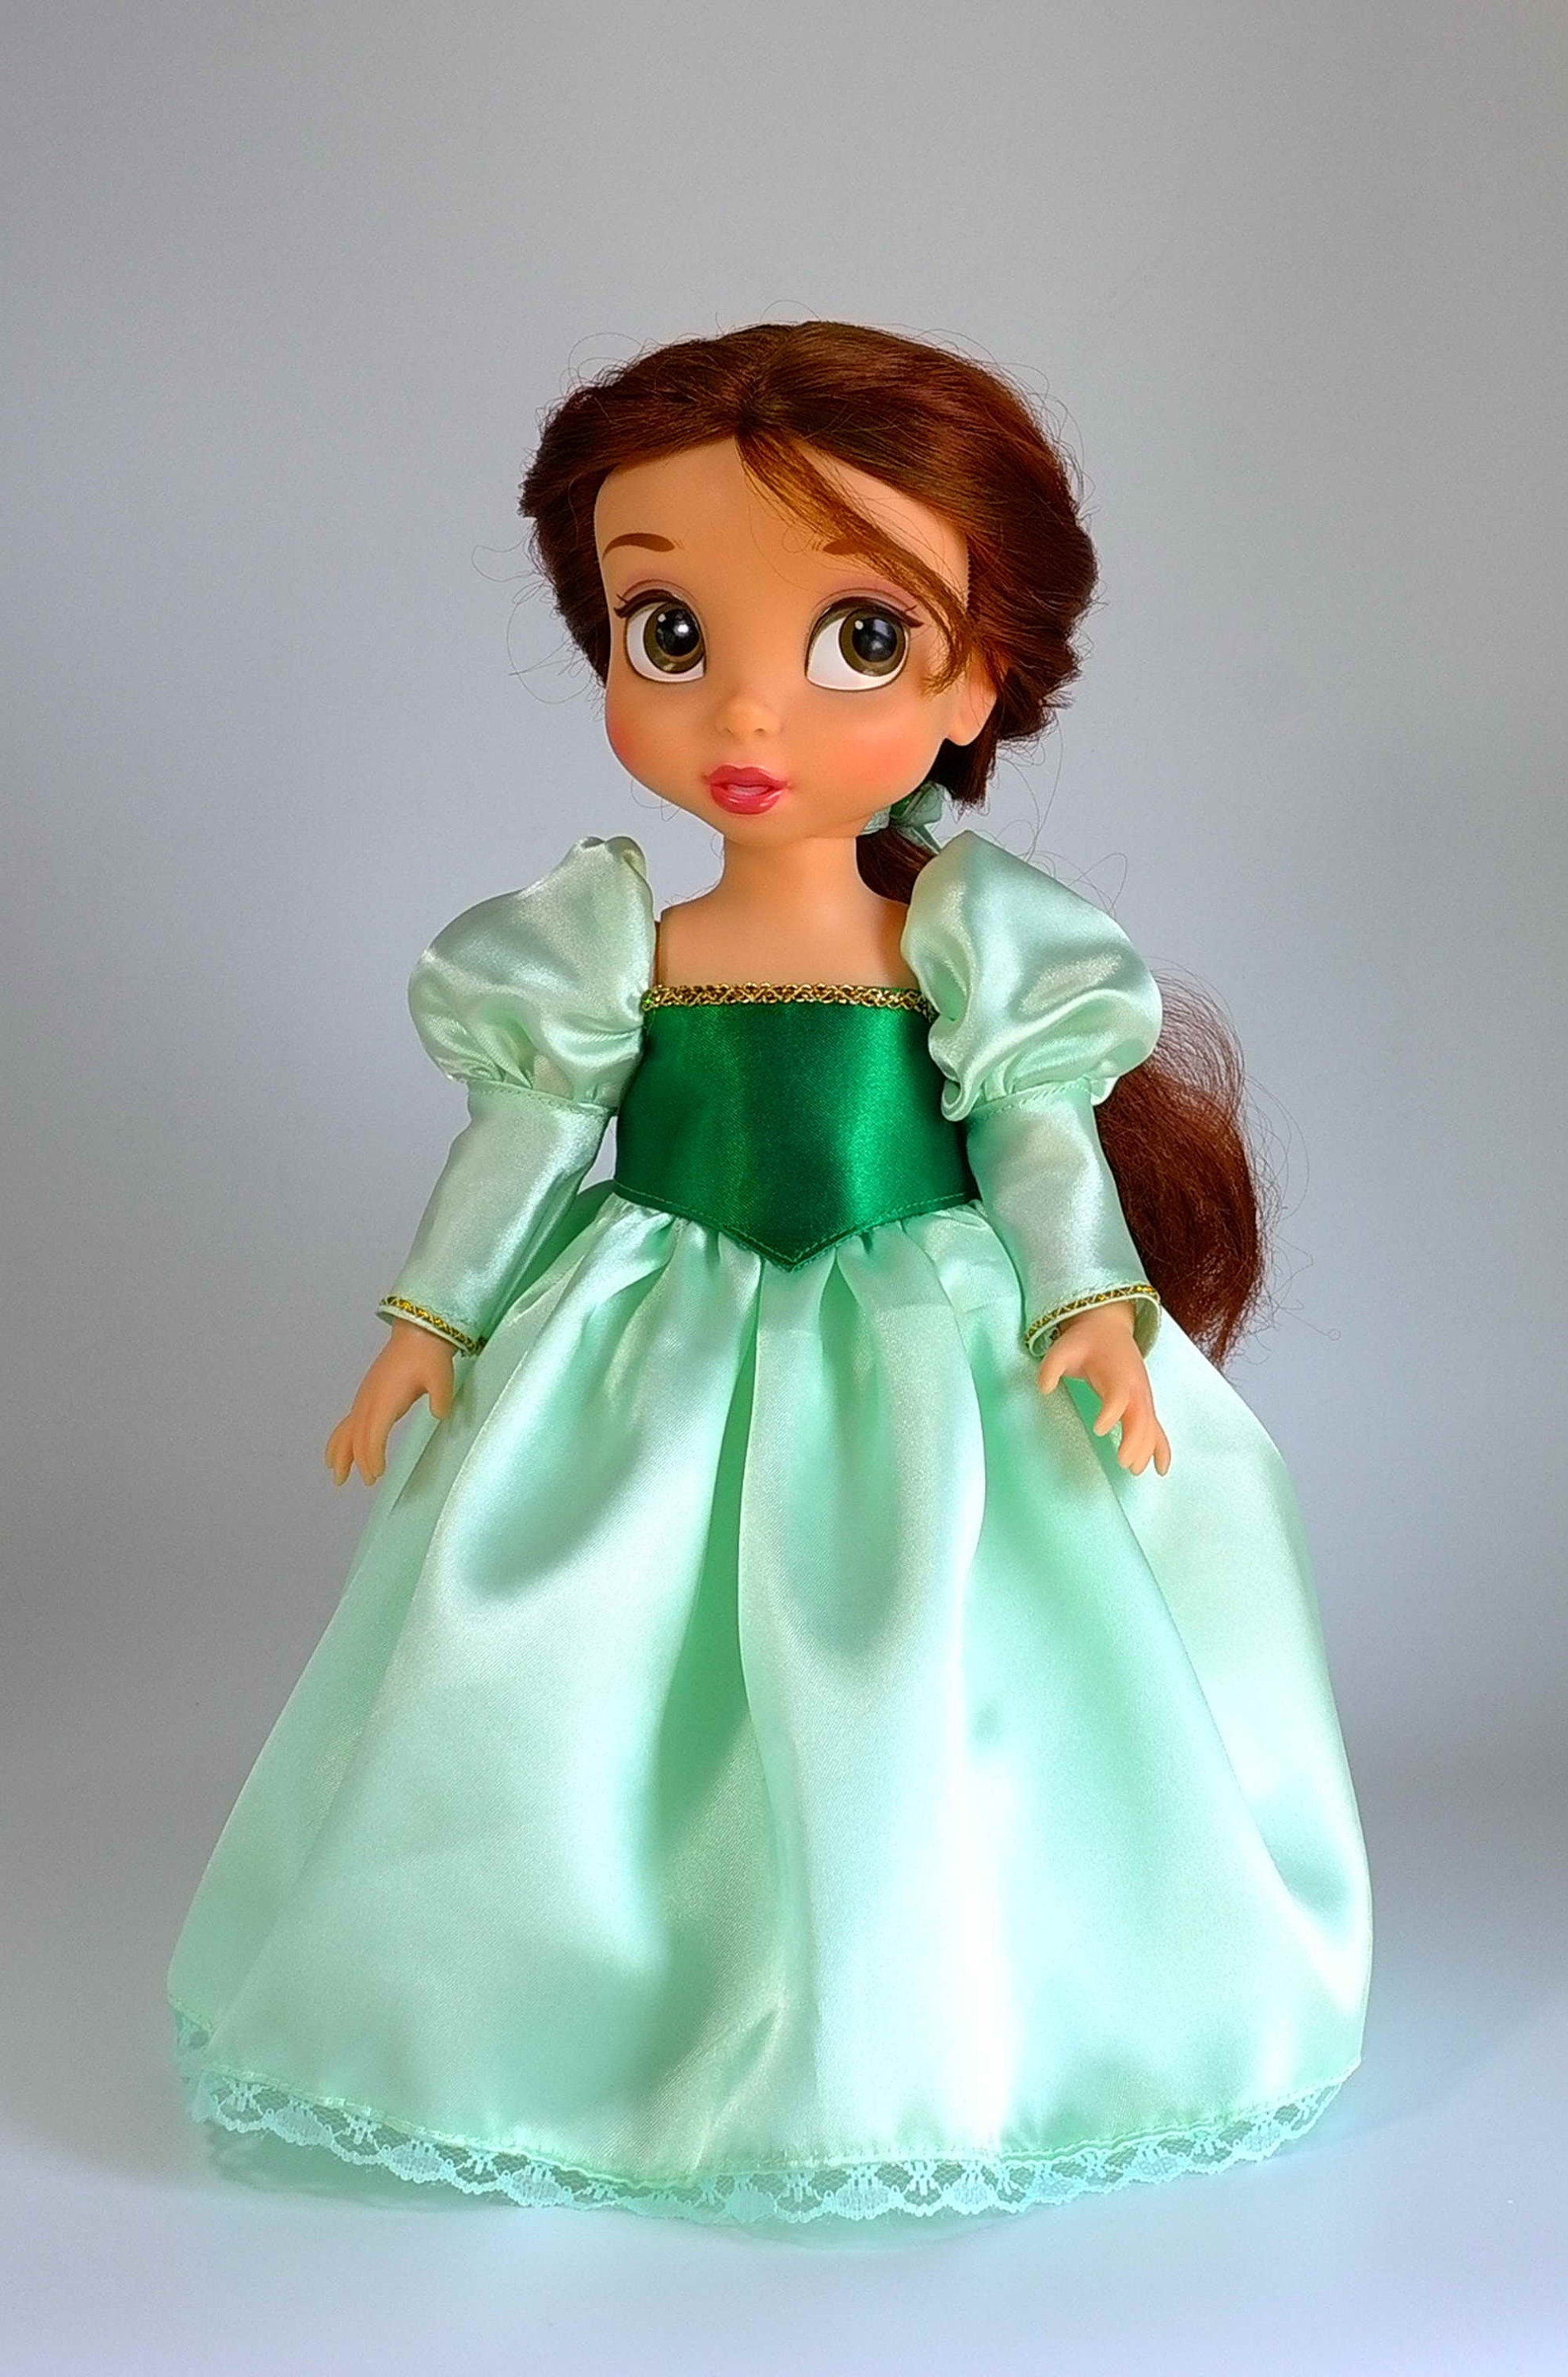 Classic Blue ball gown for Disney animator doll 16"